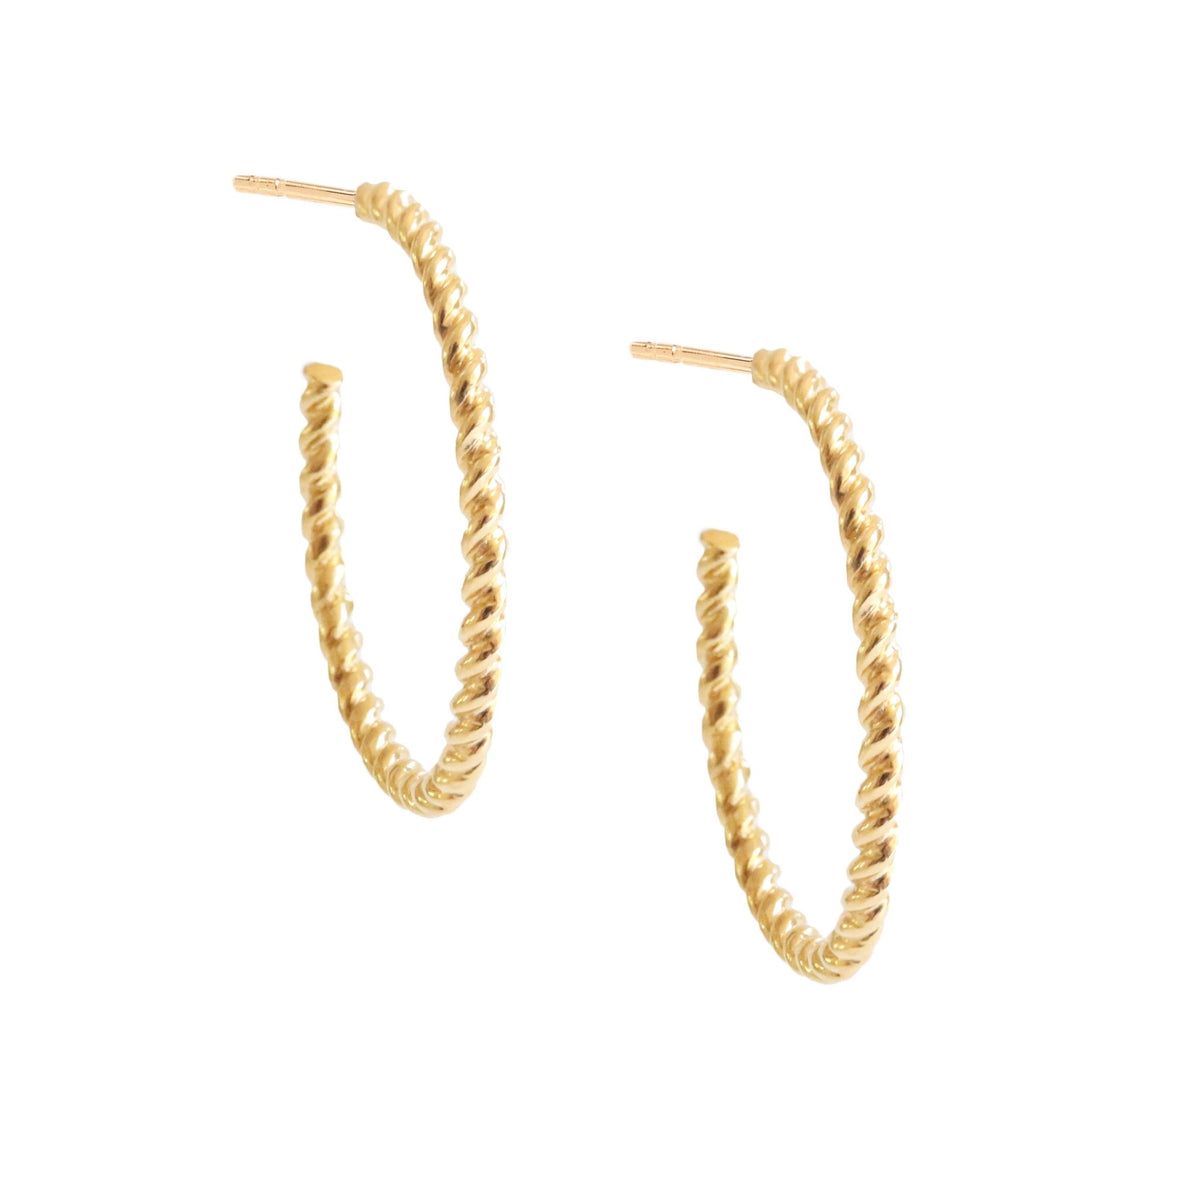 POISE CABLE LINK HOOPS - GOLD - SO PRETTY CARA COTTER